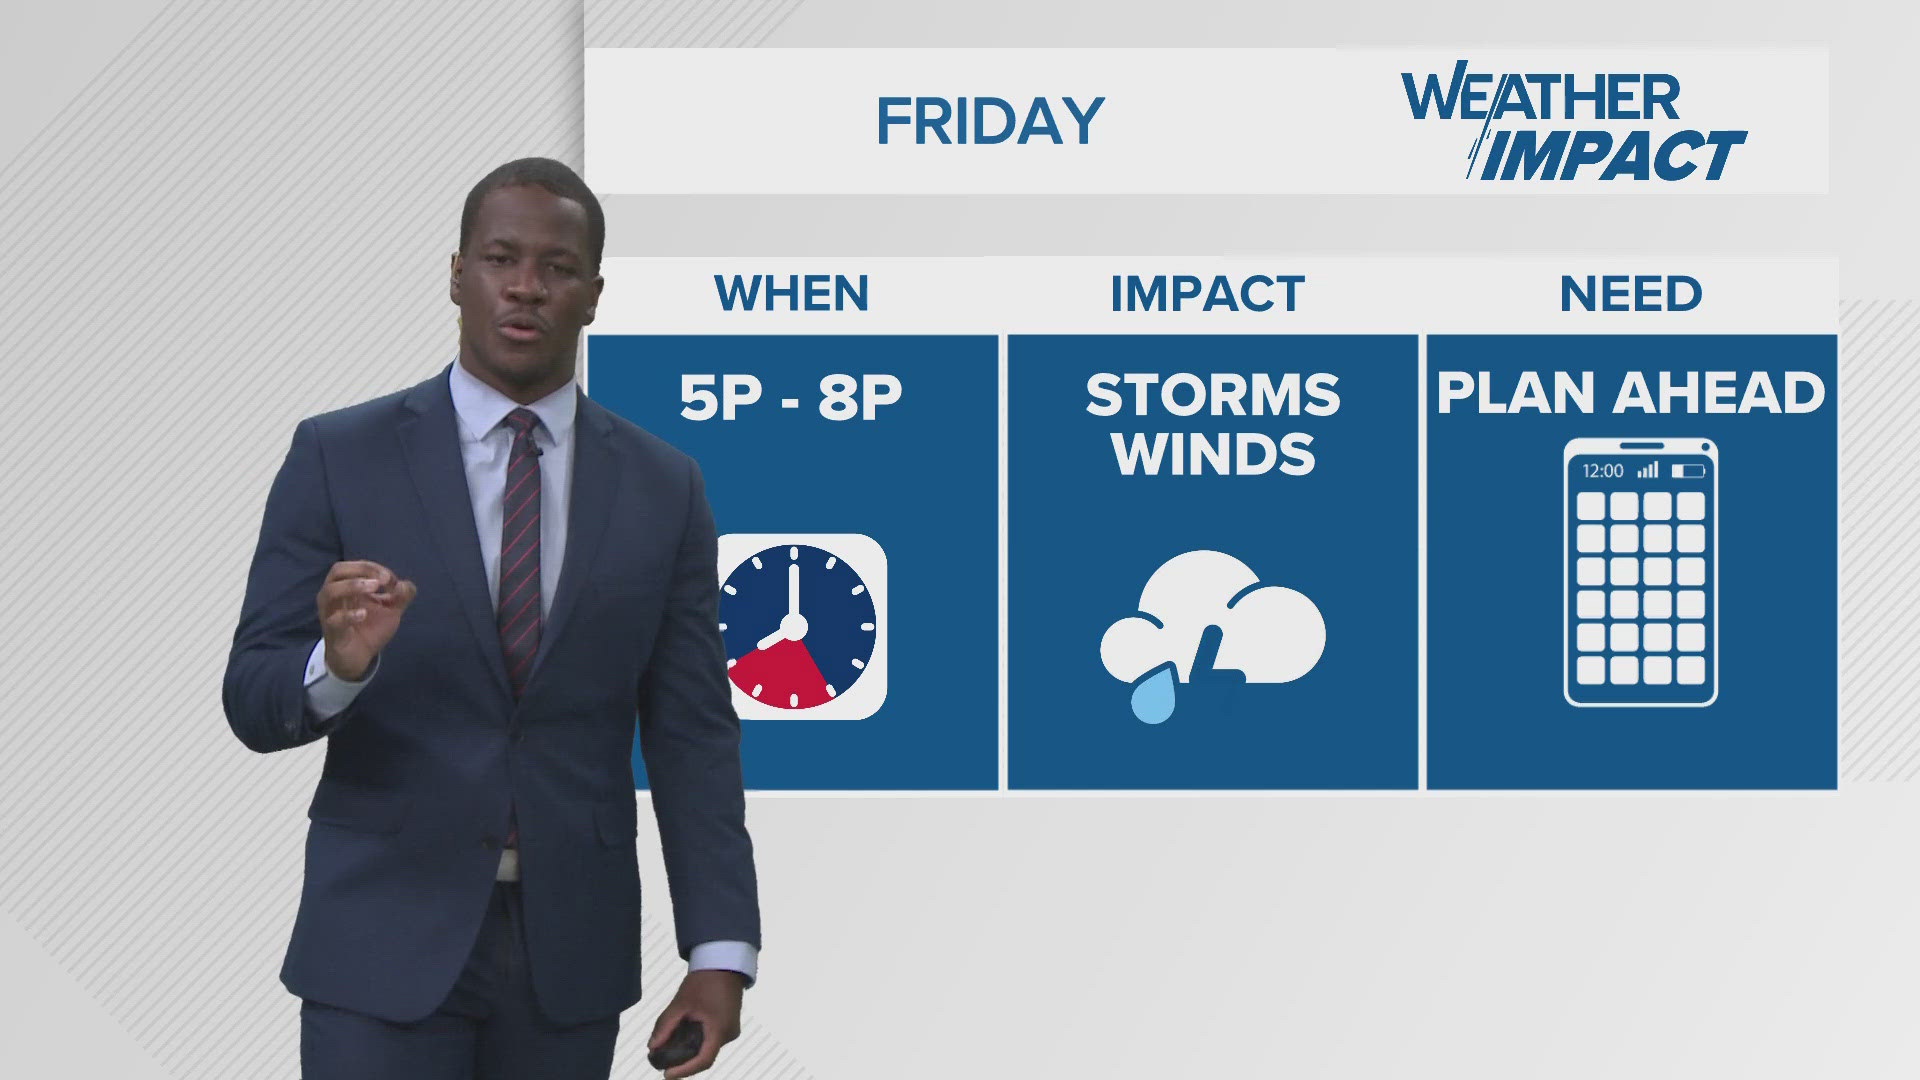 The high humidity will fuel showers and storms.